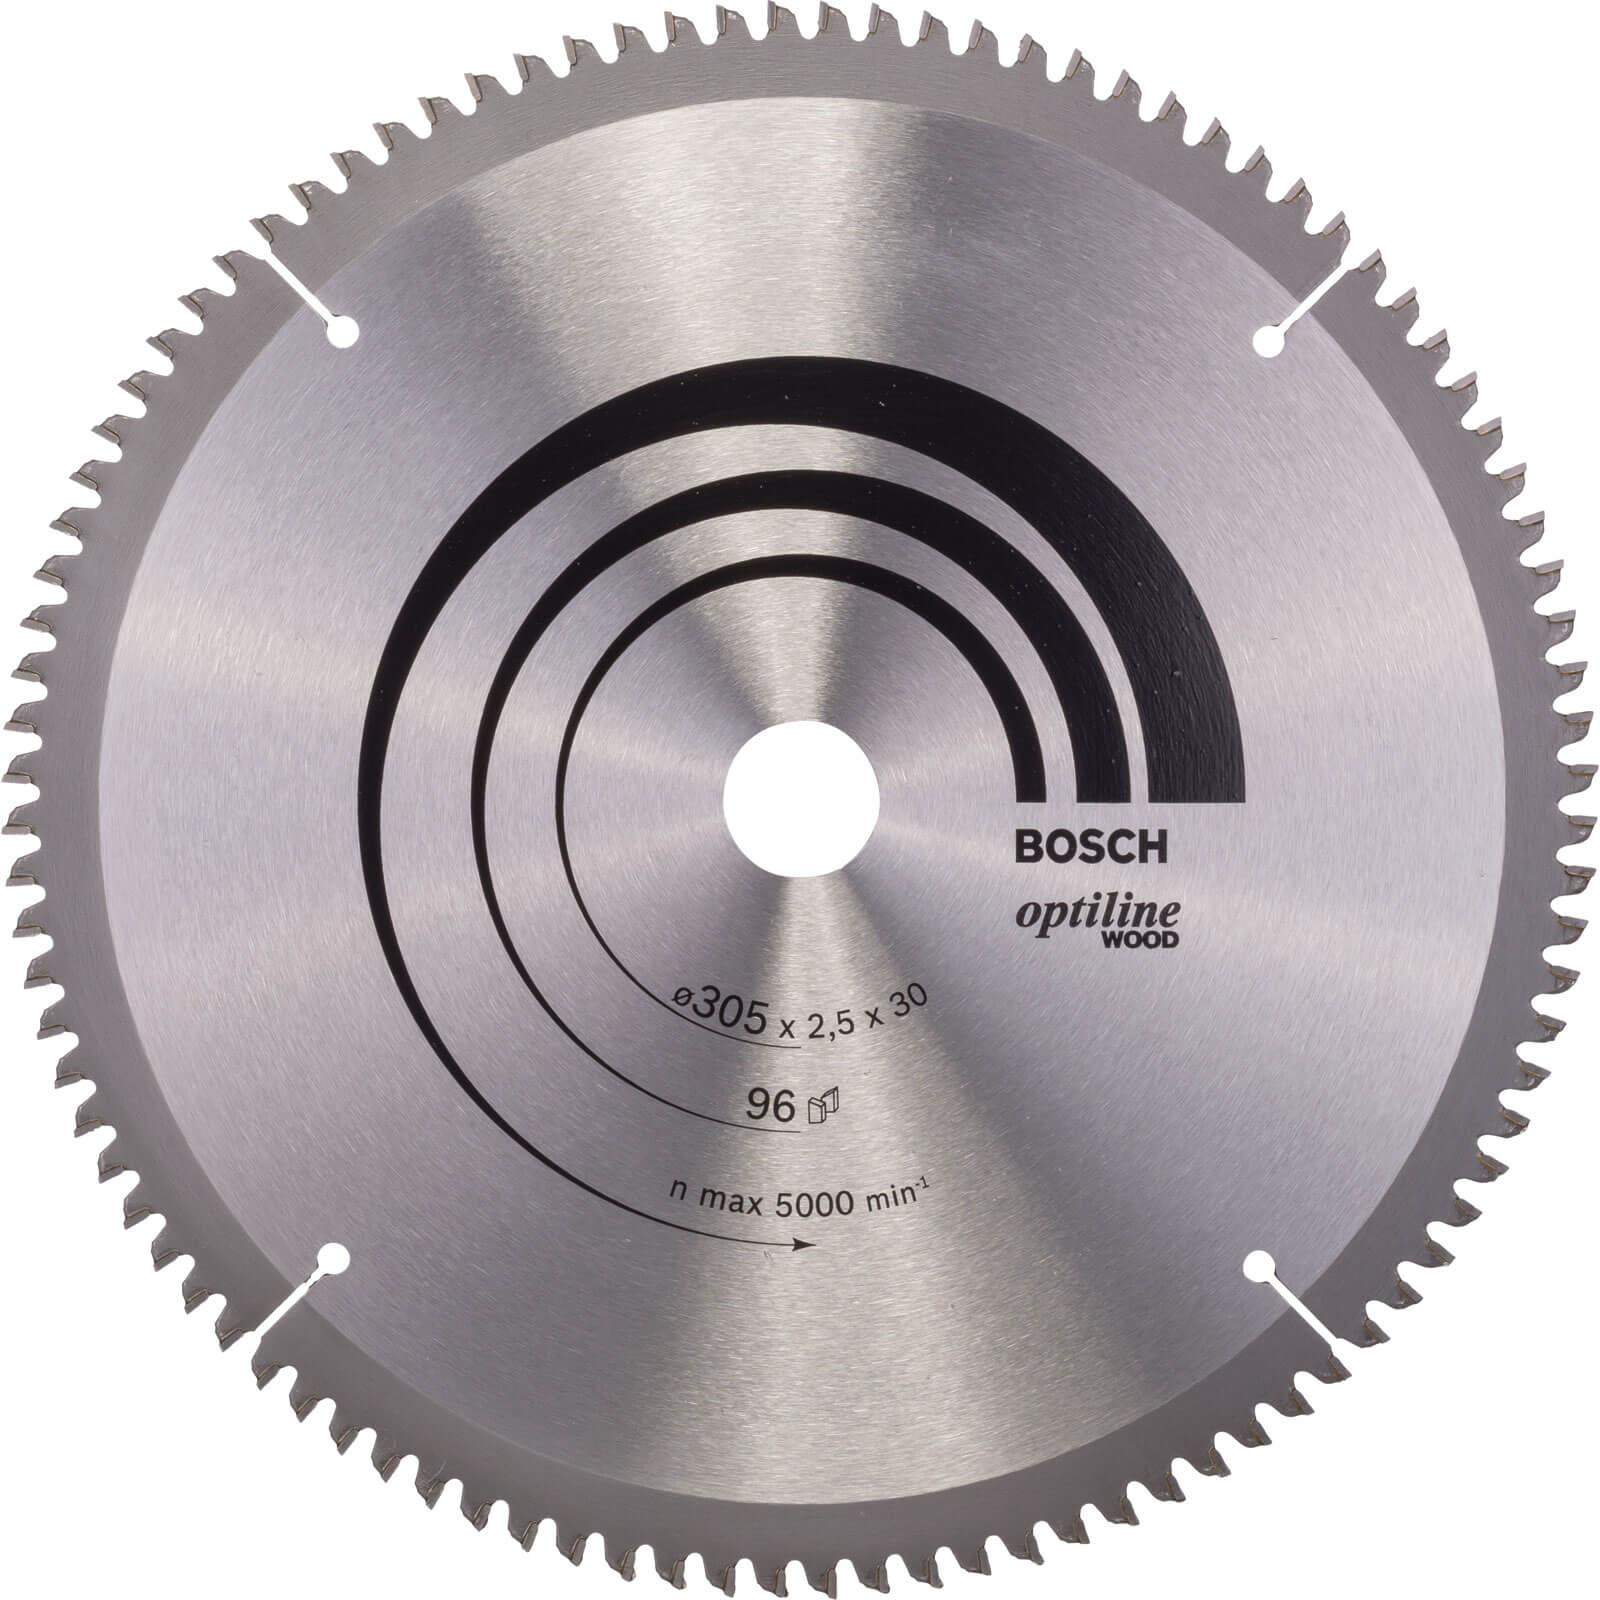 Image of Bosch Optiline Wood Cutting Mitre Saw Blade 305mm 96T 30mm